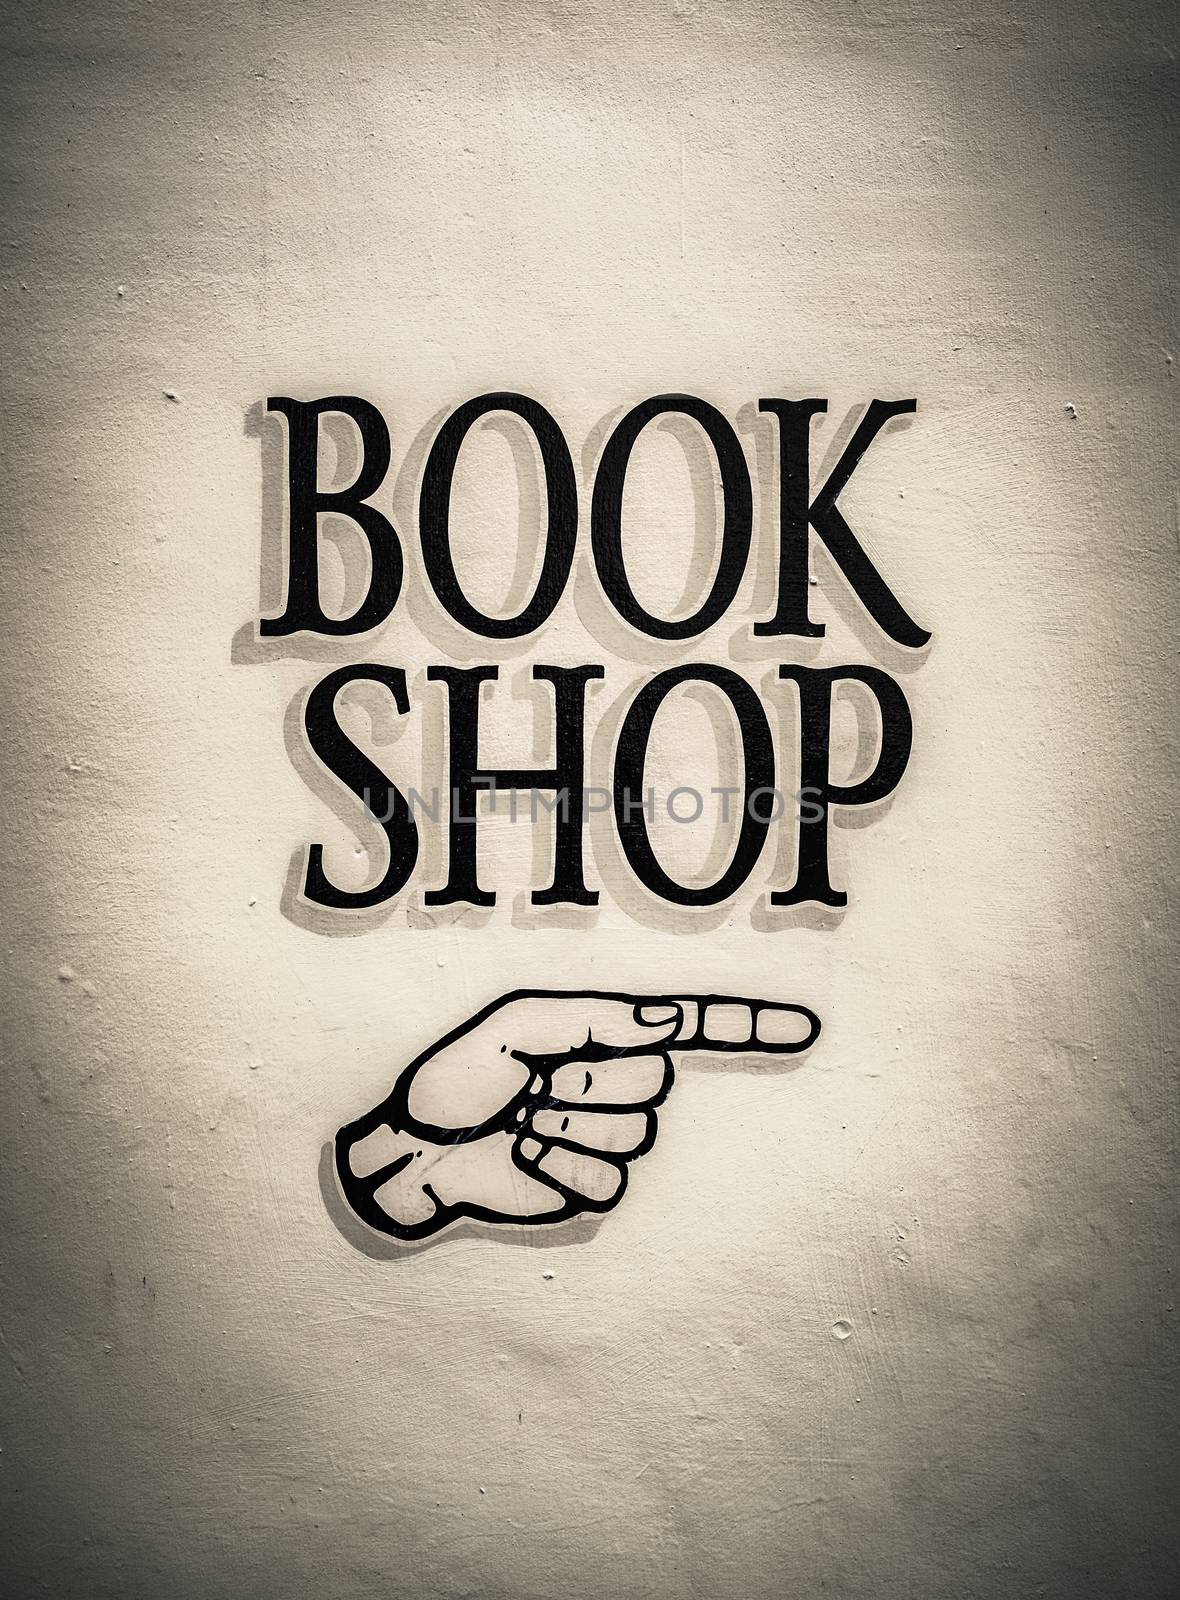 Vintage Book Shop Sign With A Pointing Hand